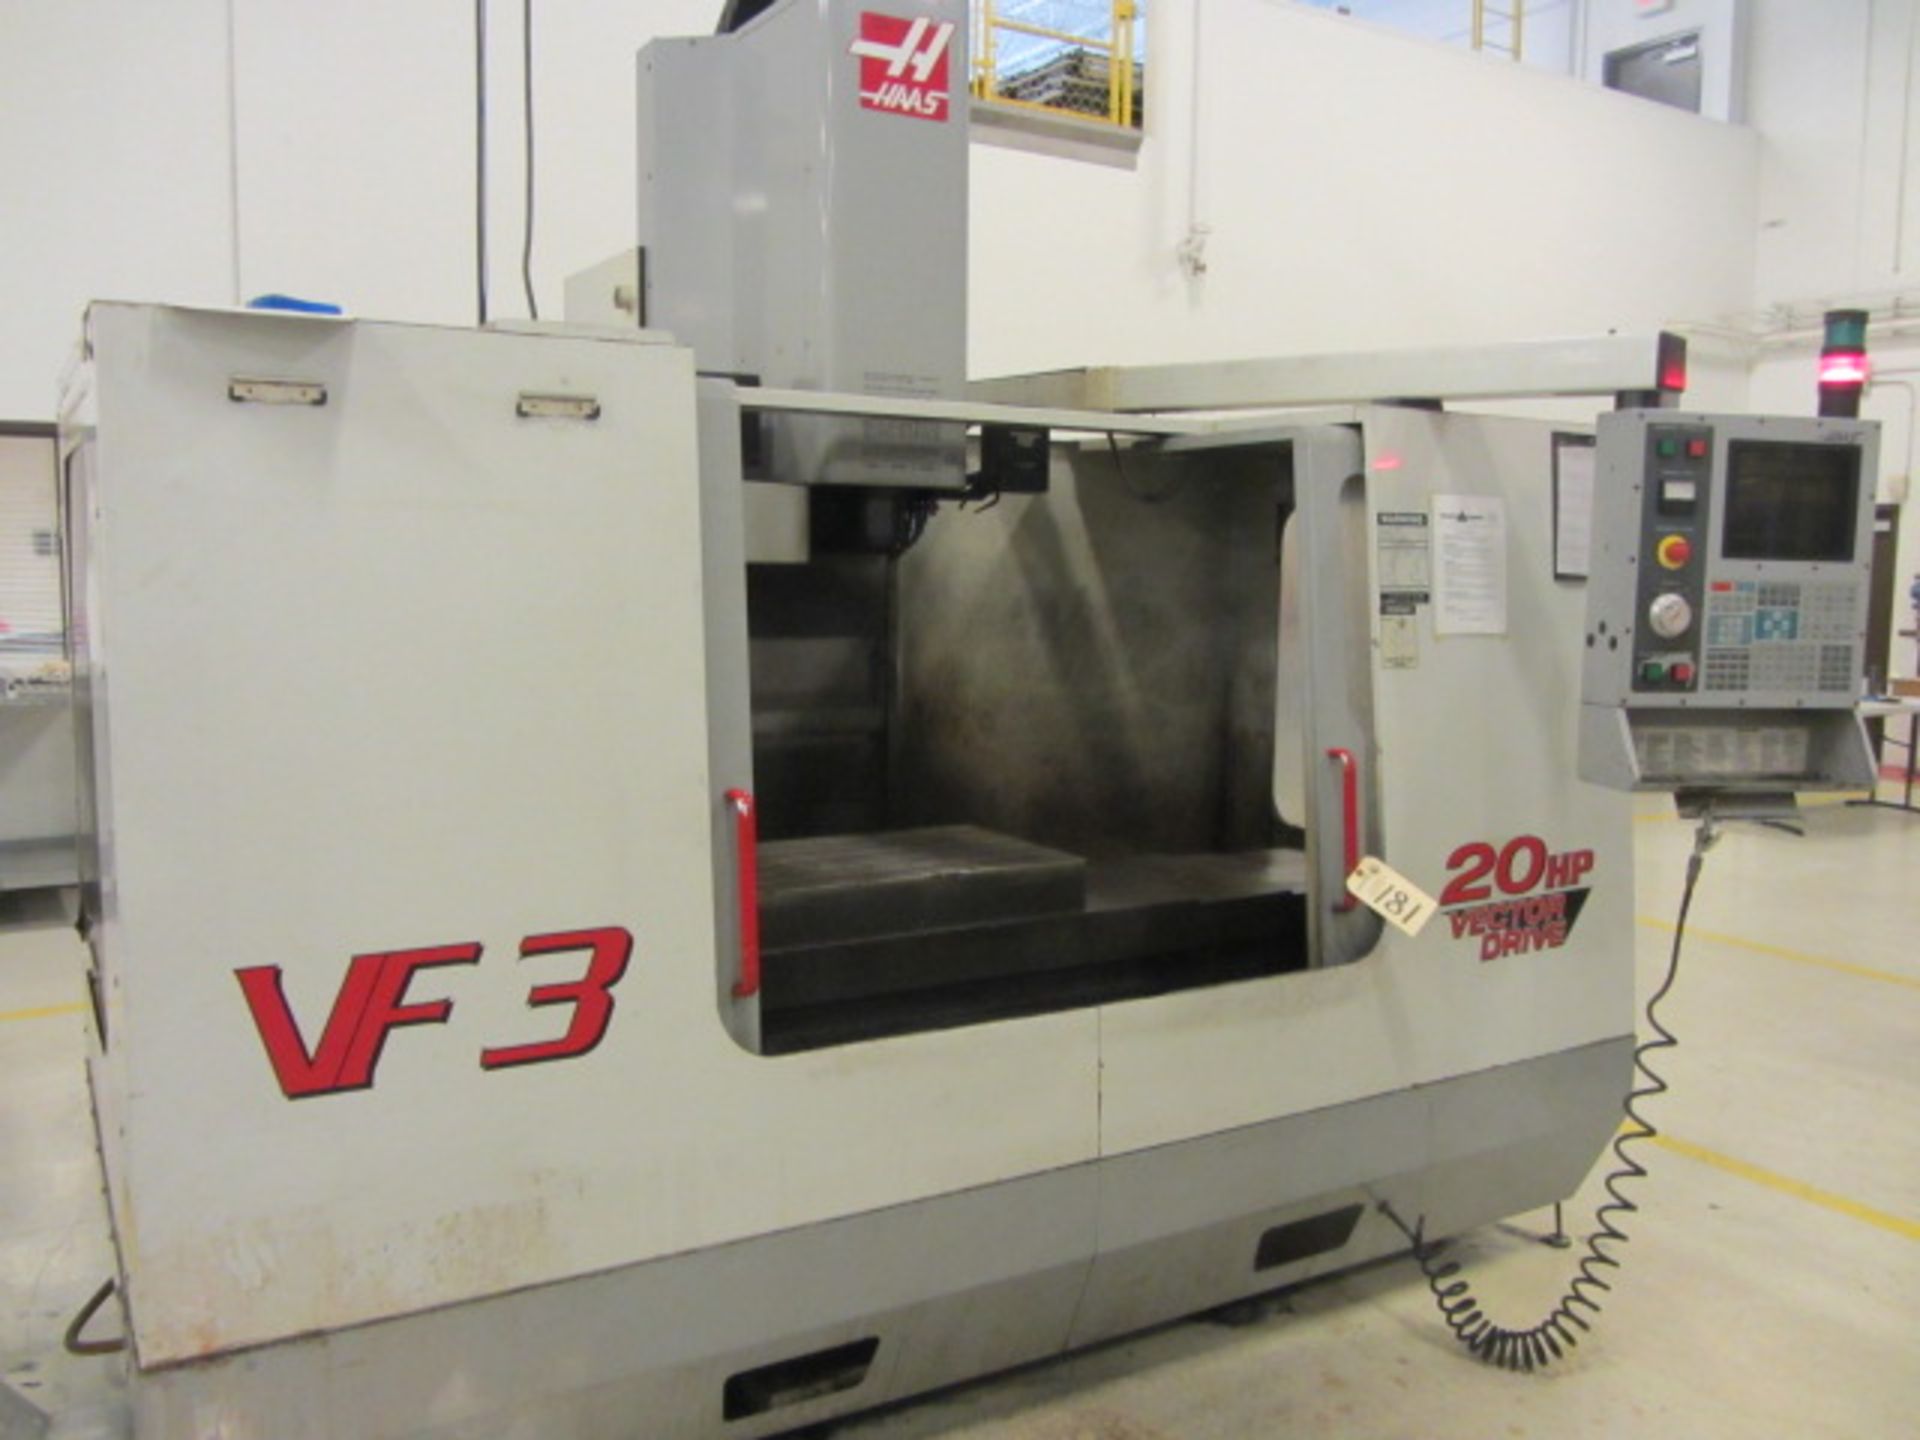 Haas VF-3B CNC Vertical Machining Center with 48'' x 18'' Table, #40 Taper Spindle Speeds to 7500 - Image 4 of 7